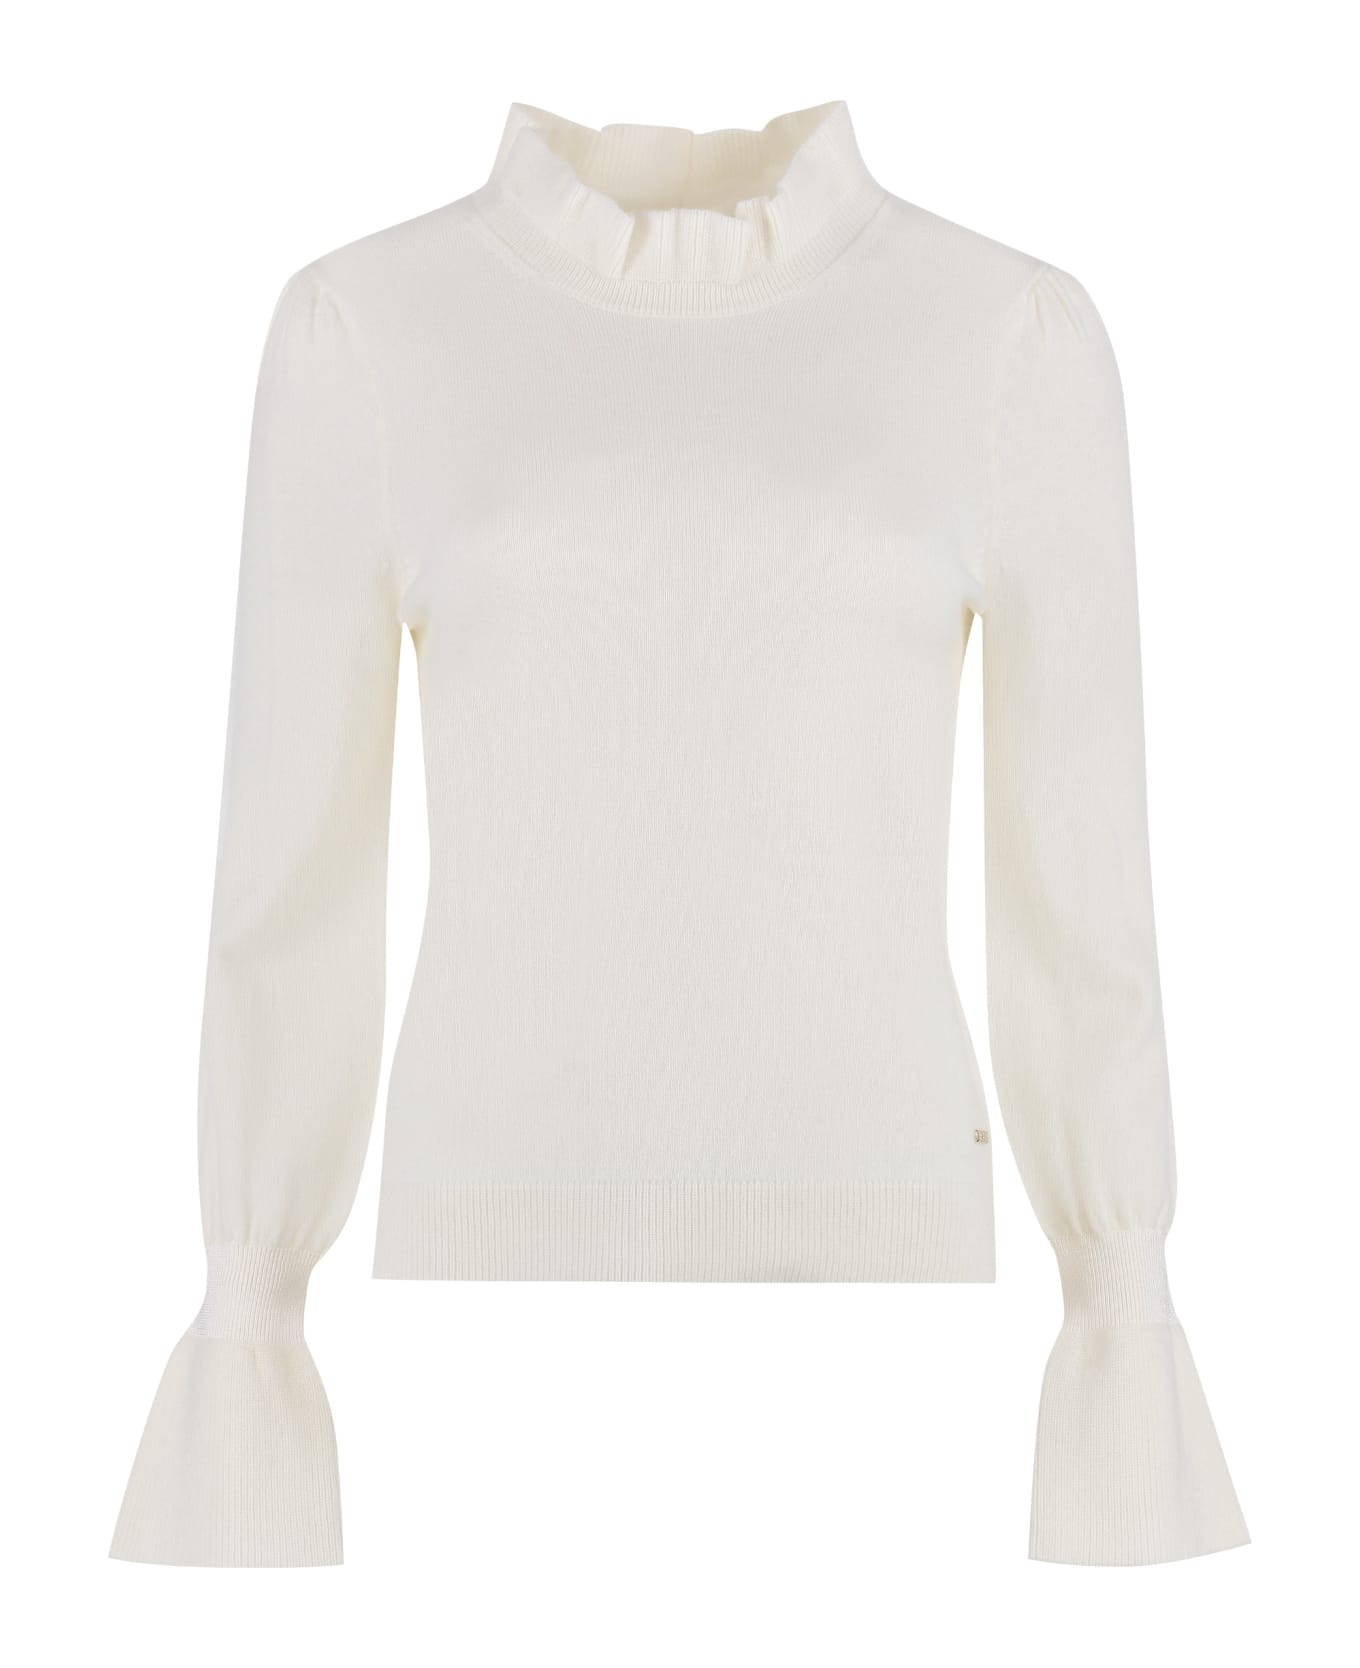 Hugo Boss Ribbed Cashmere And Wool Sweater - Ivory